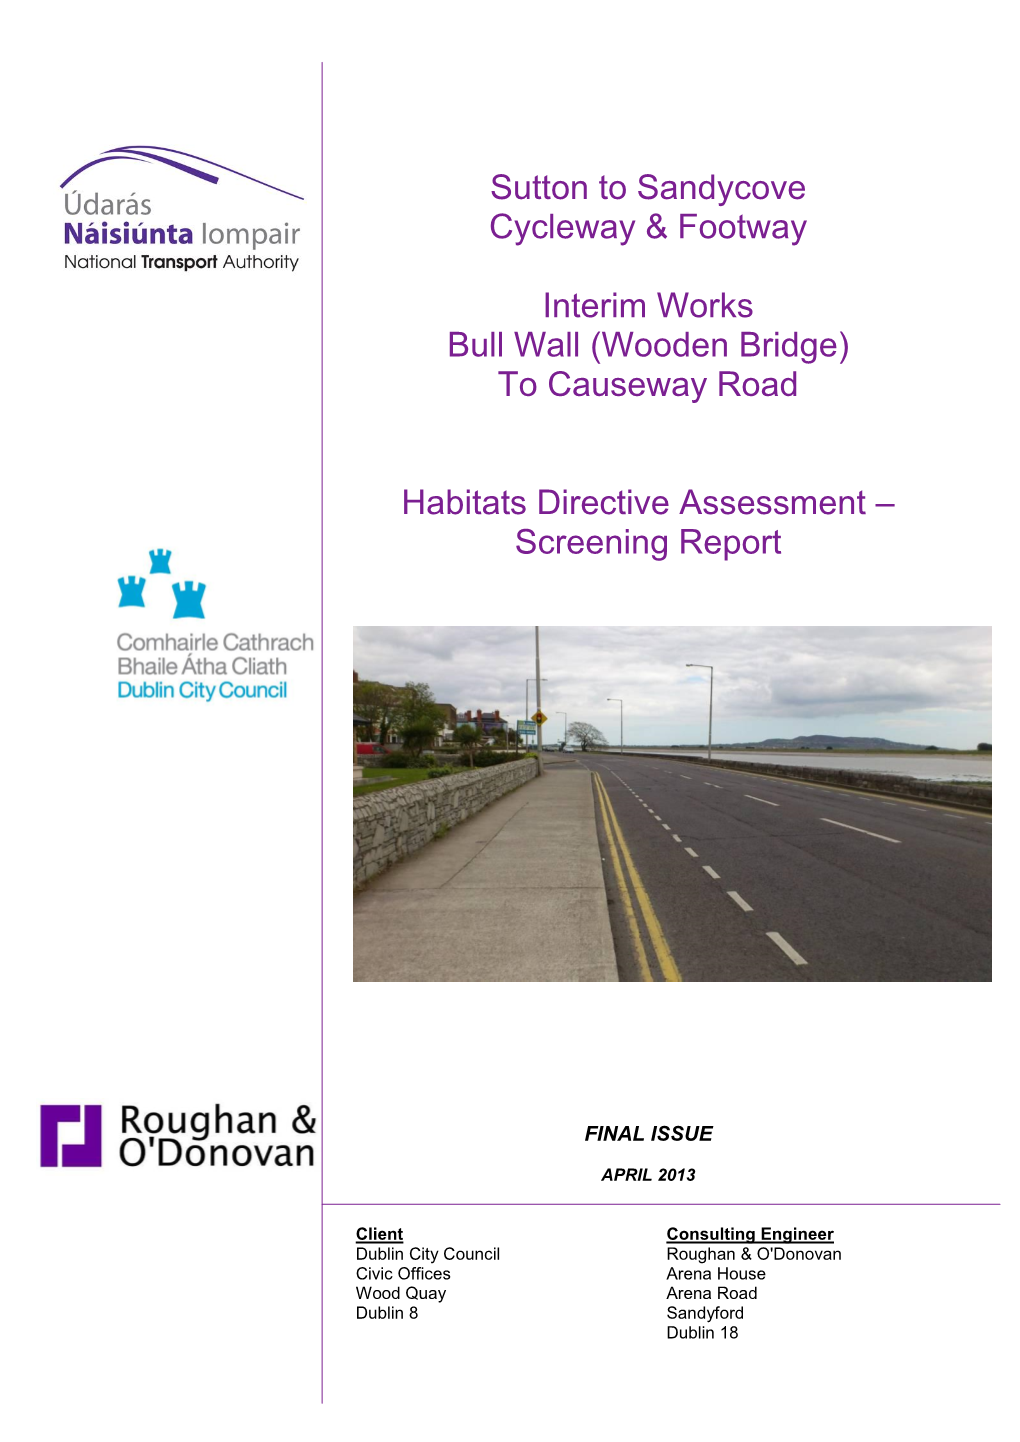 Sutton to Sandycove Cycleway & Footway Interim Works Bull Wall